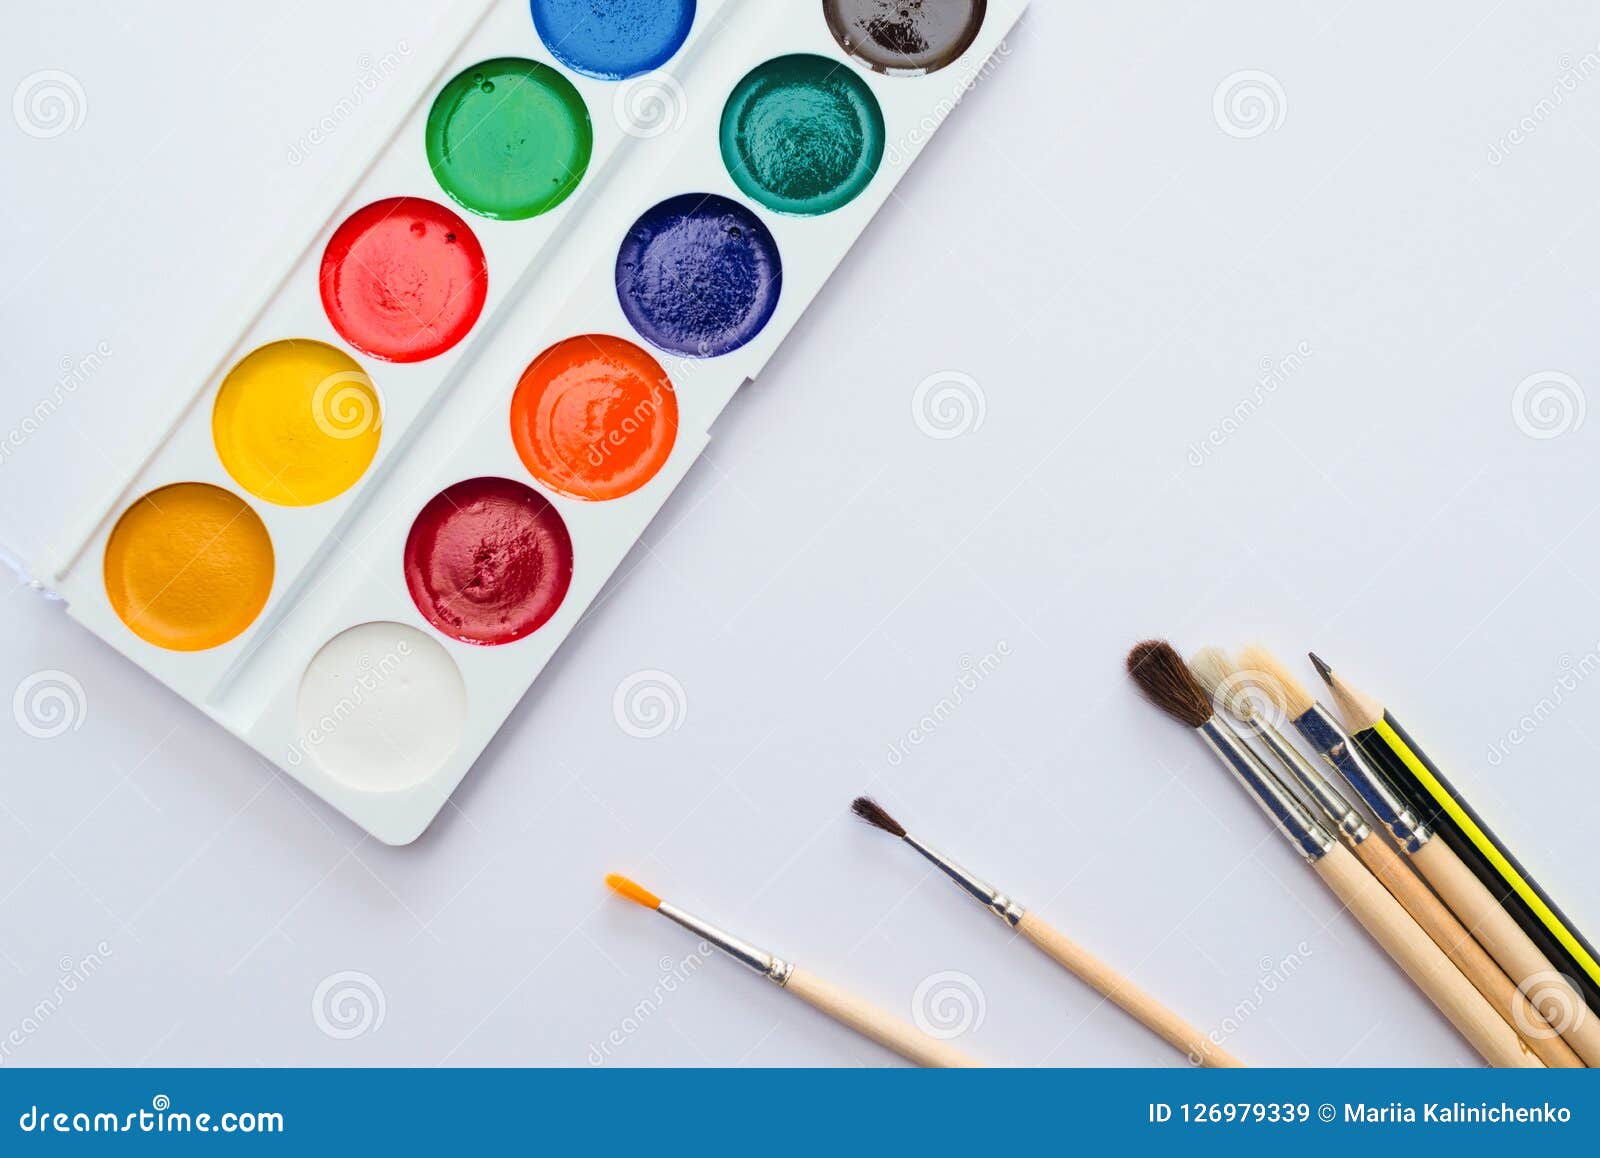 Palette of Watercolors and Paintbrushes on White Paper Background ...